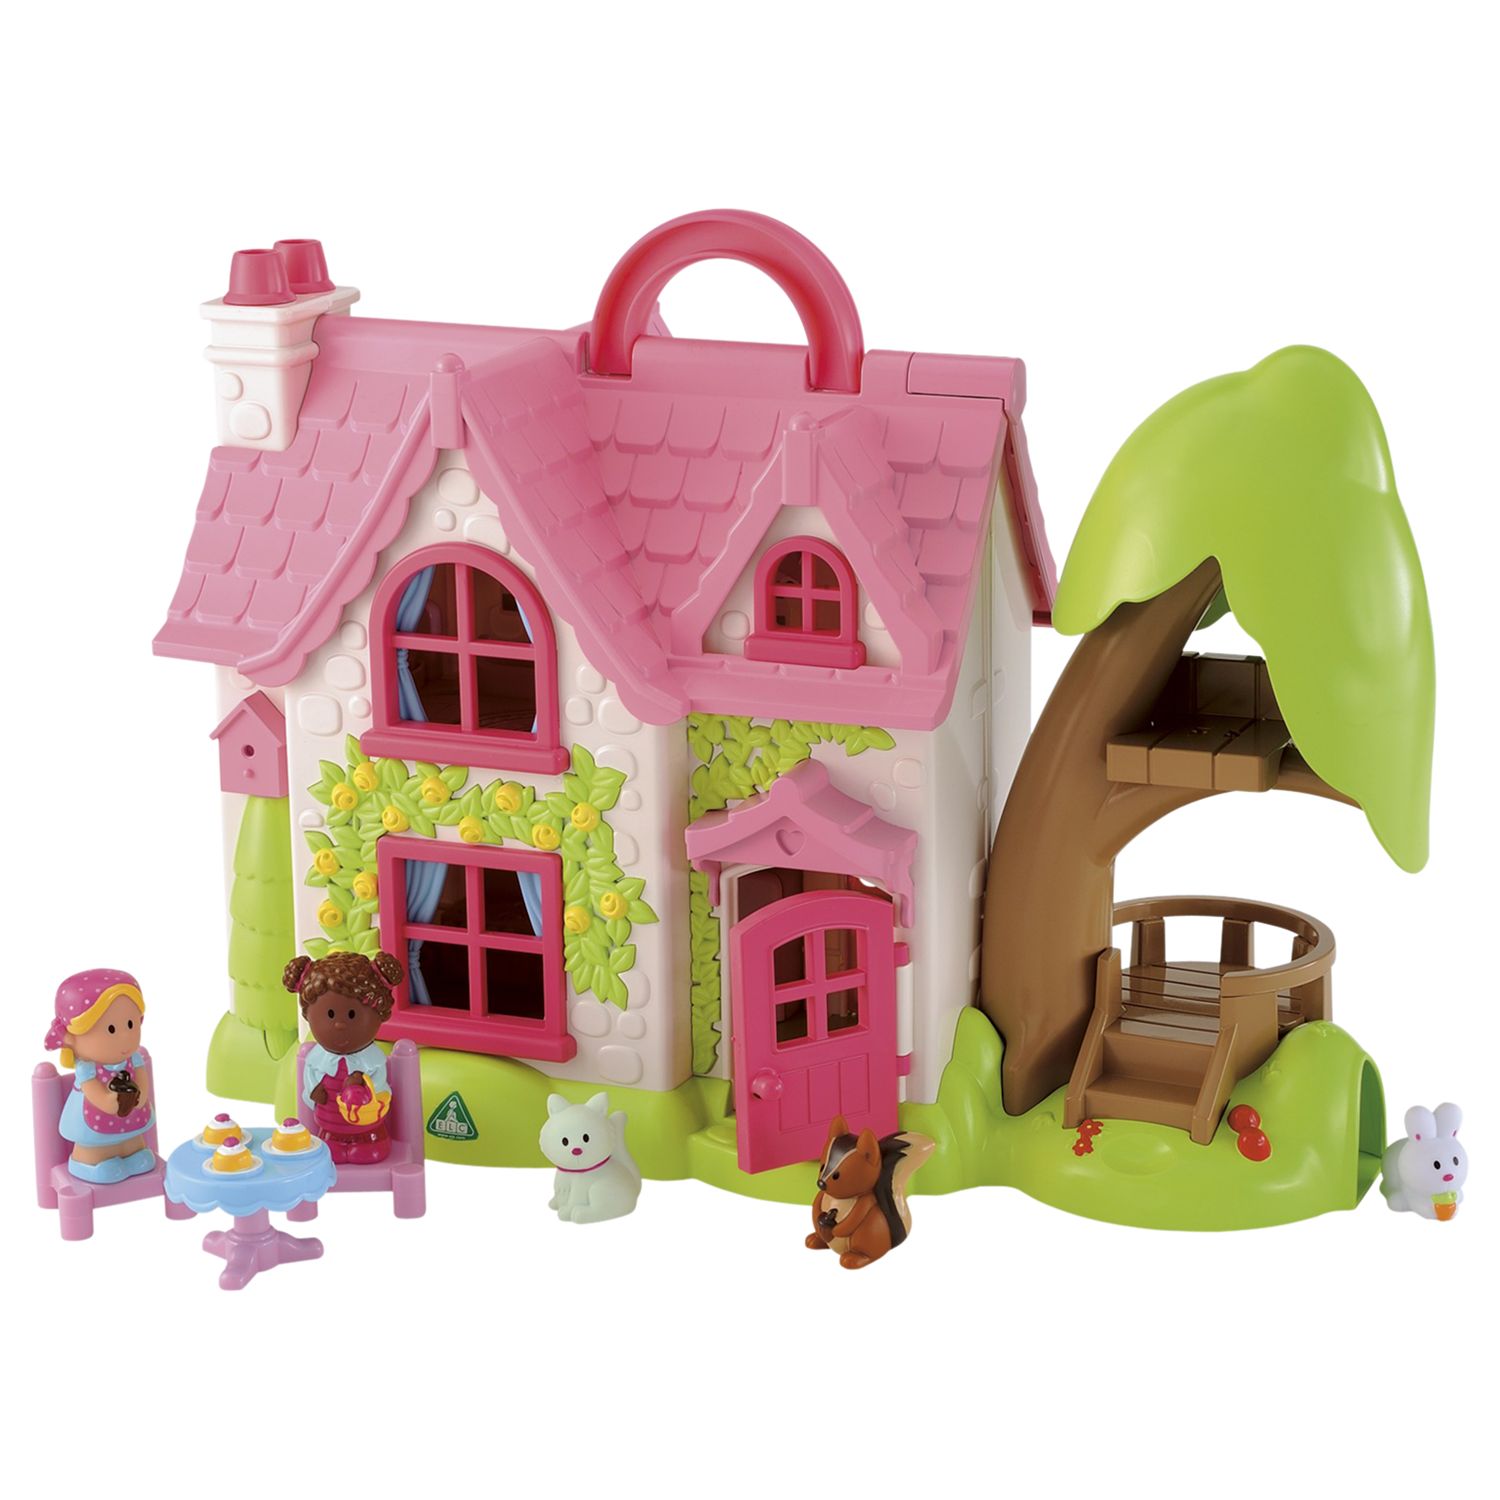 Early Learning Centre HappyLand Cherry Cottage